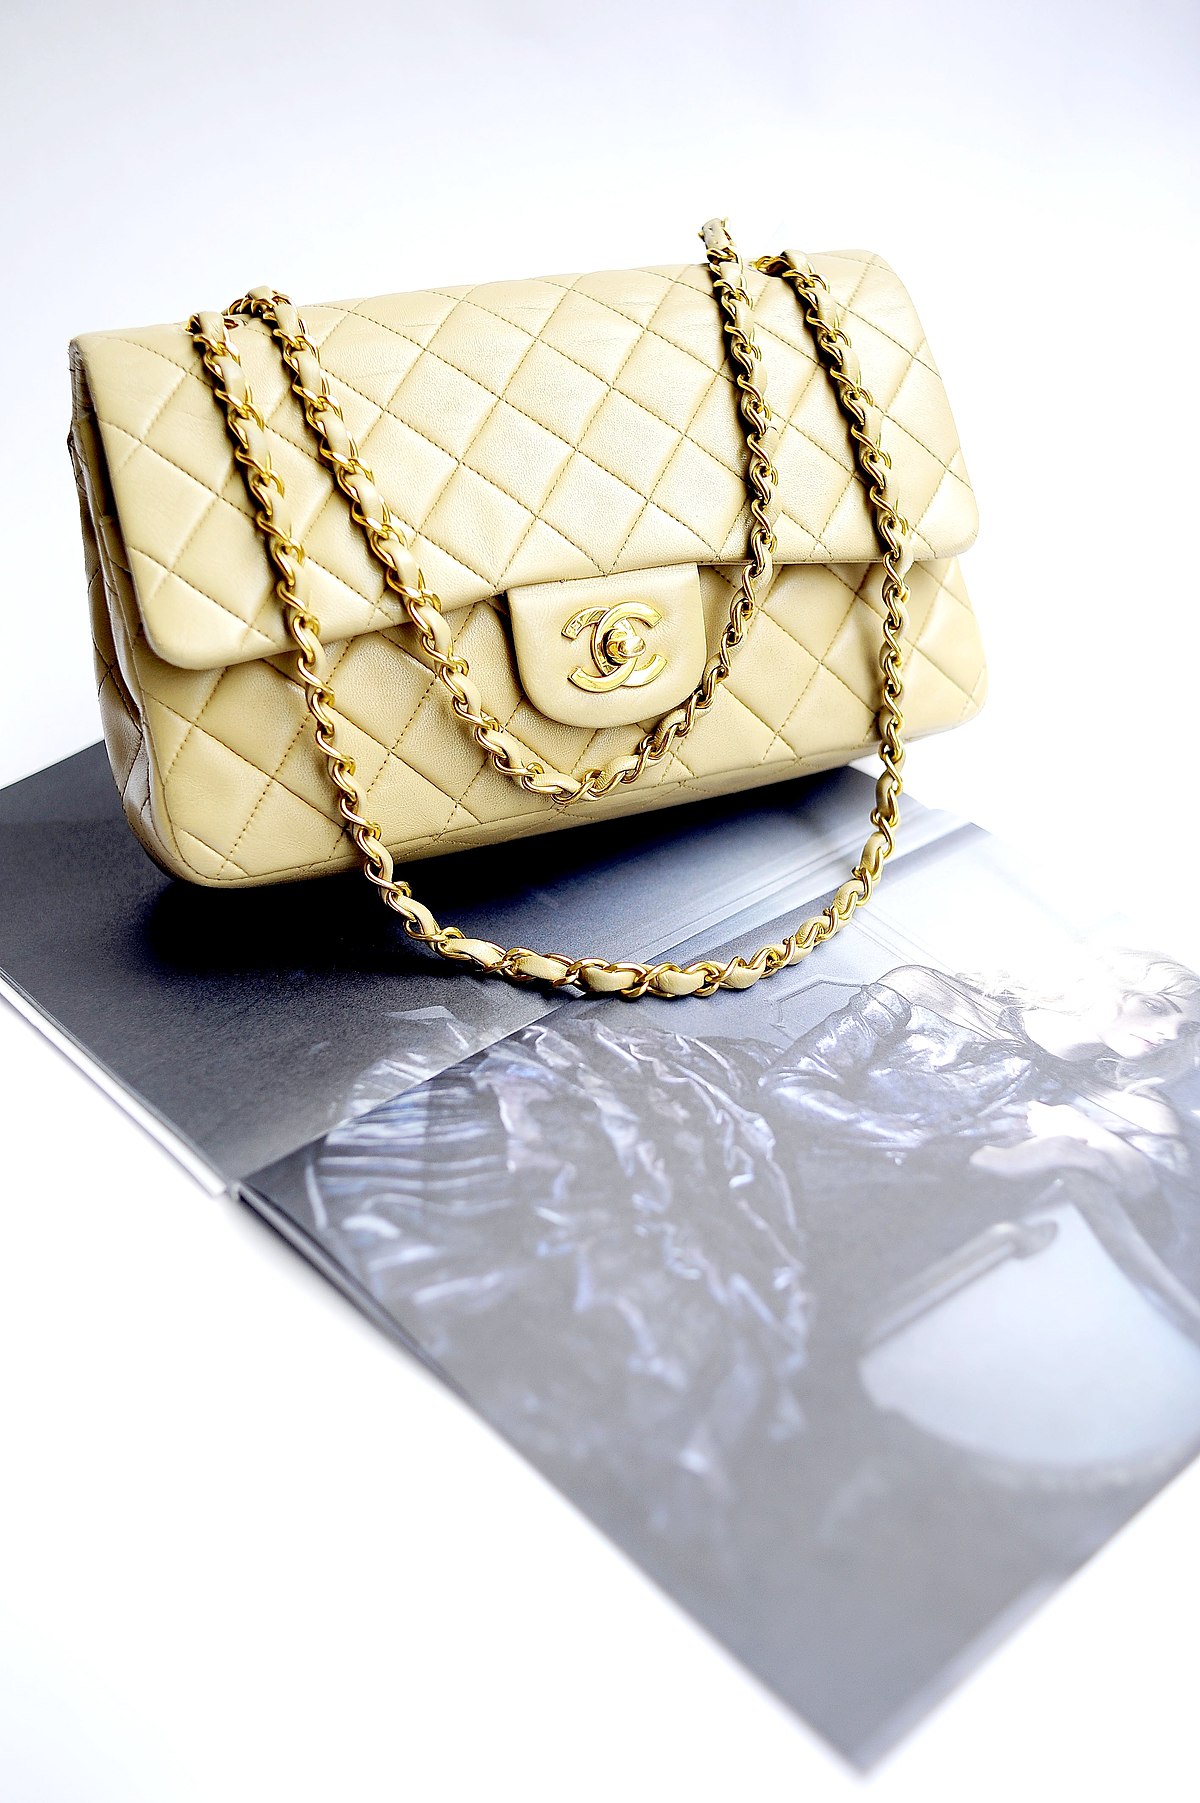 How To Buy A Classic Chanel Bag